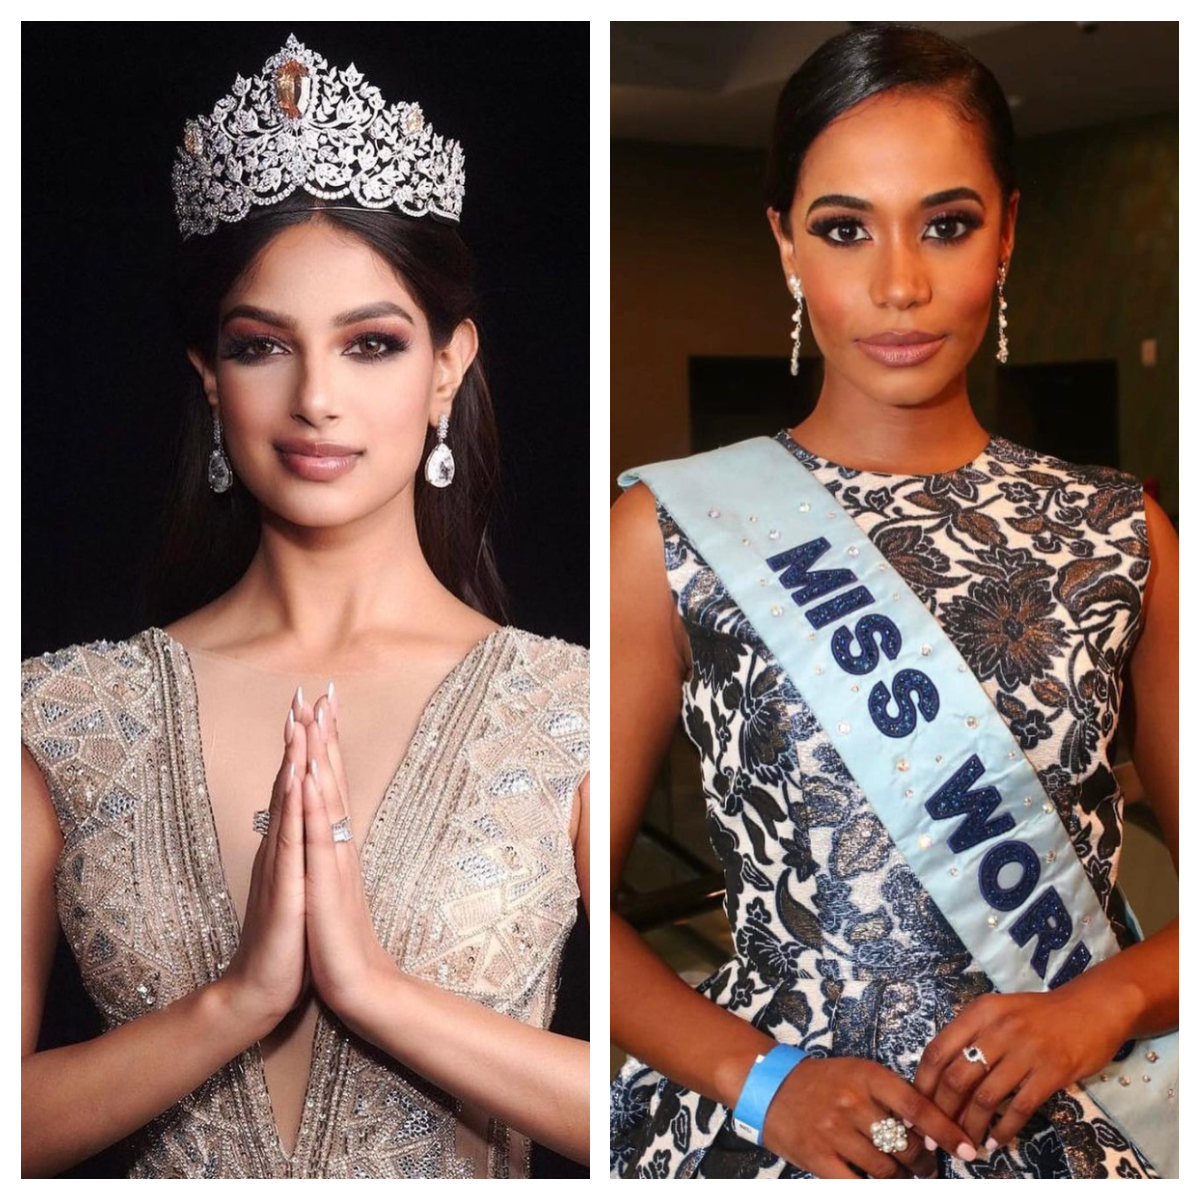 Wondering what is the difference between Miss Universe and Miss World? Read on to find out